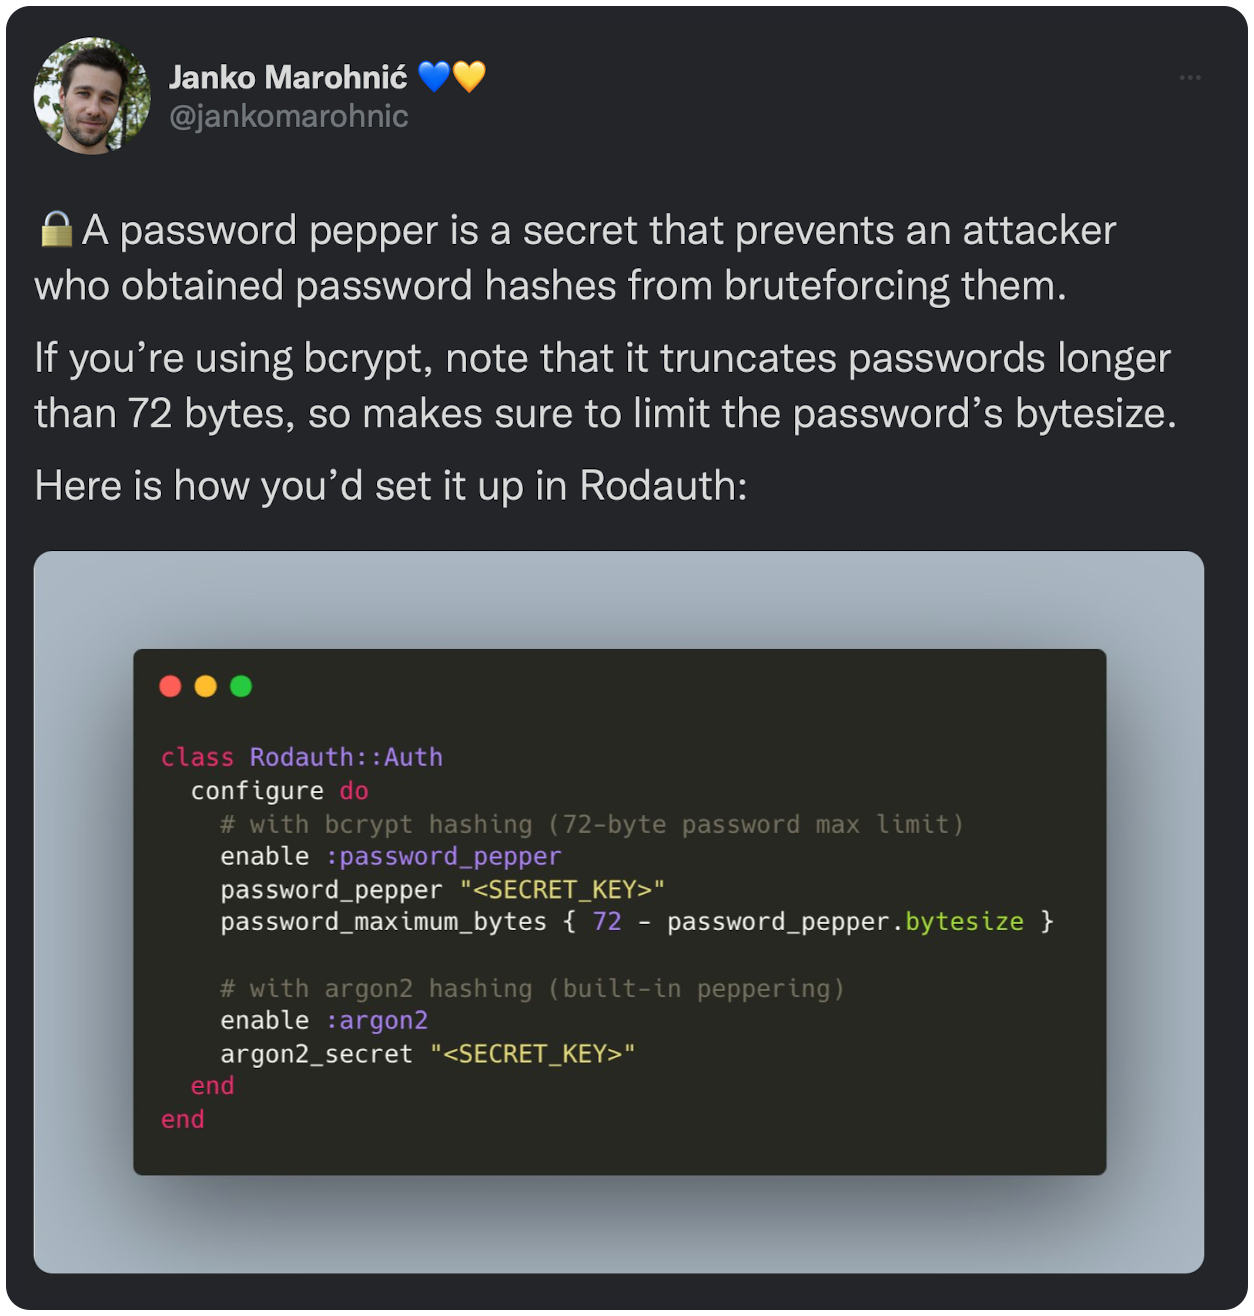 🔒A password pepper is a secret that prevents an attacker who obtained password hashes from bruteforcing them. If you’re using bcrypt, note that it truncates passwords longer than 72 bytes, so makes sure to limit the password’s bytesize. Here is how you’d set it up in Rodauth: 